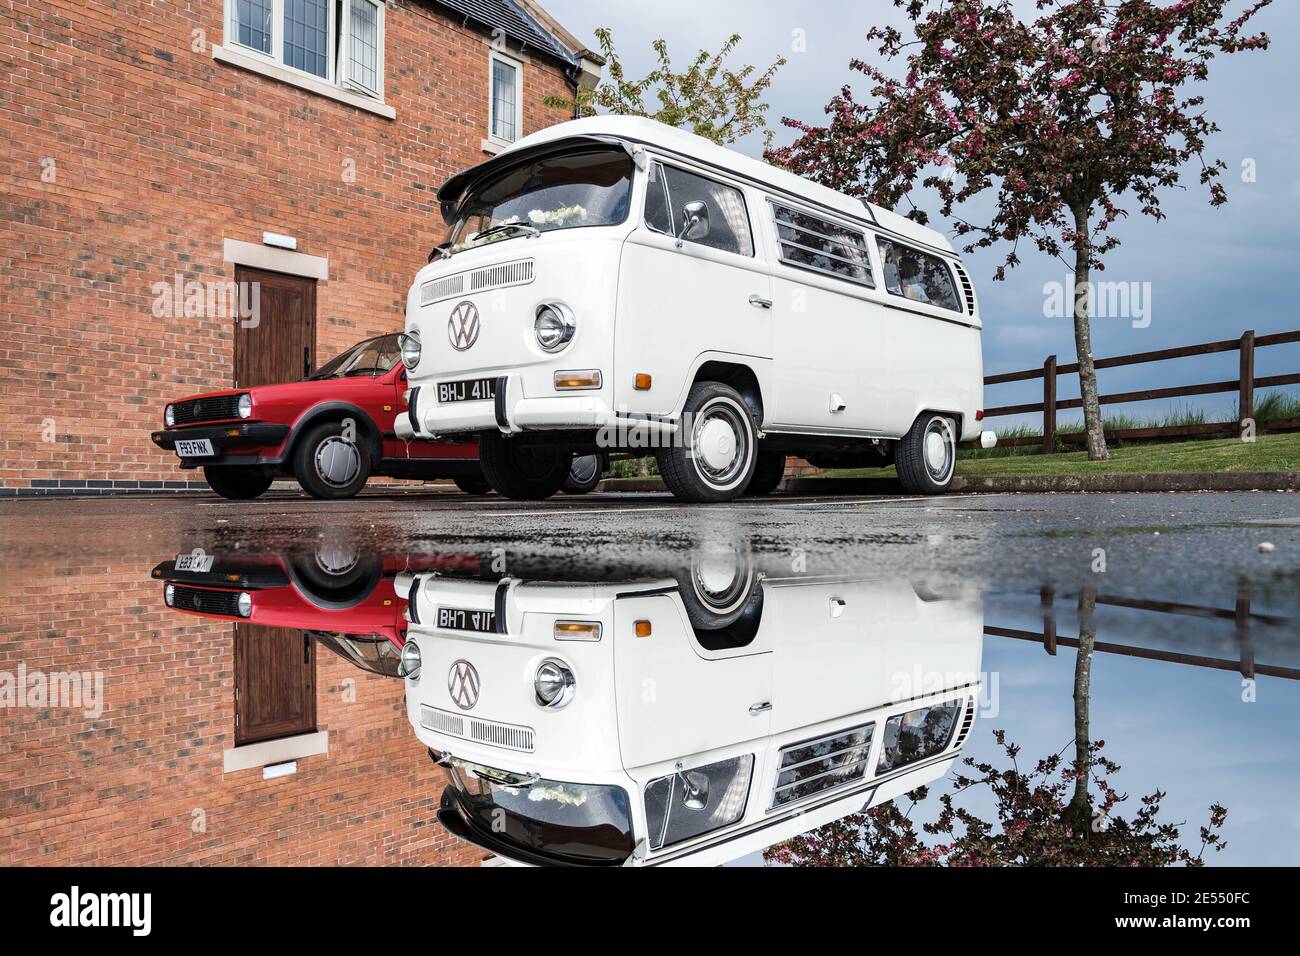 VW camper van reflection in puddle after rain white water cooled screen classic Volkswagen wedding car cream steel wheels red Polo Golf mirror image Stock Photo